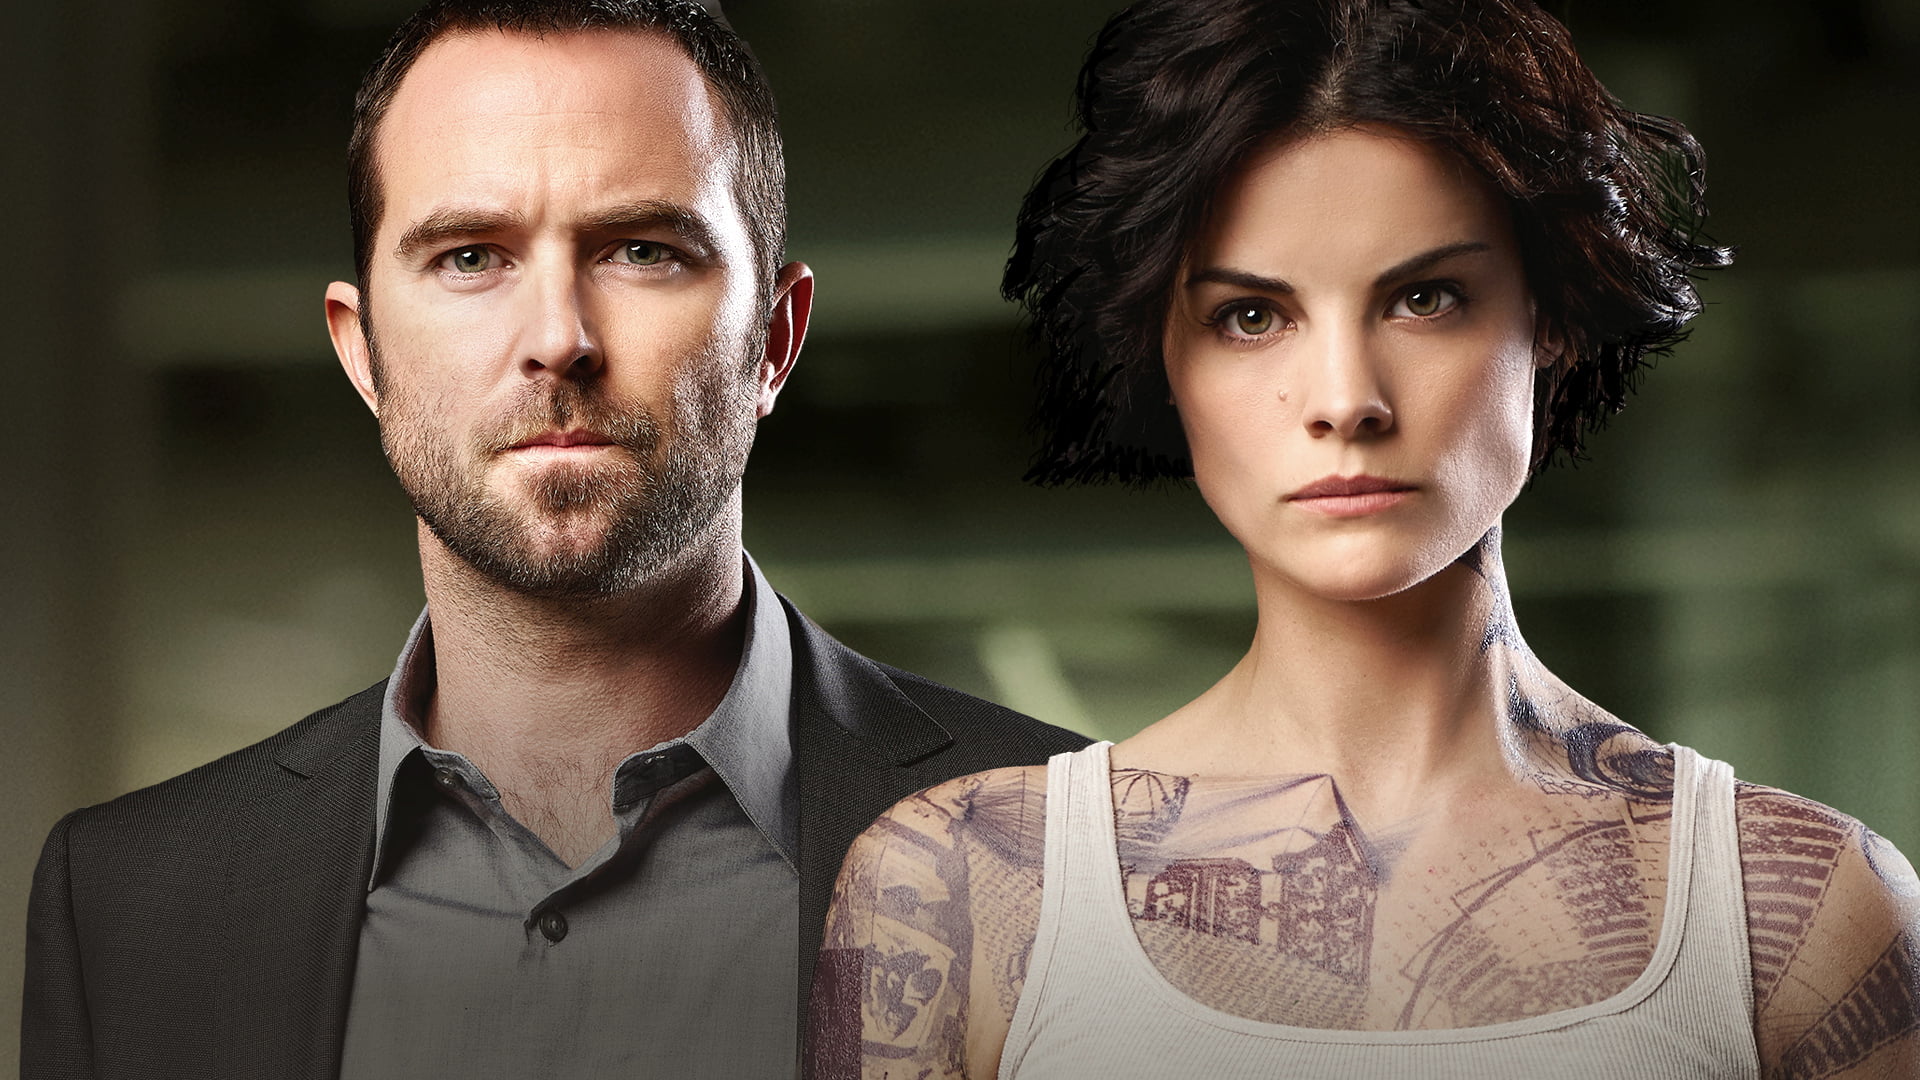 blindspot, tv shows, portrait, two people, looking at camera